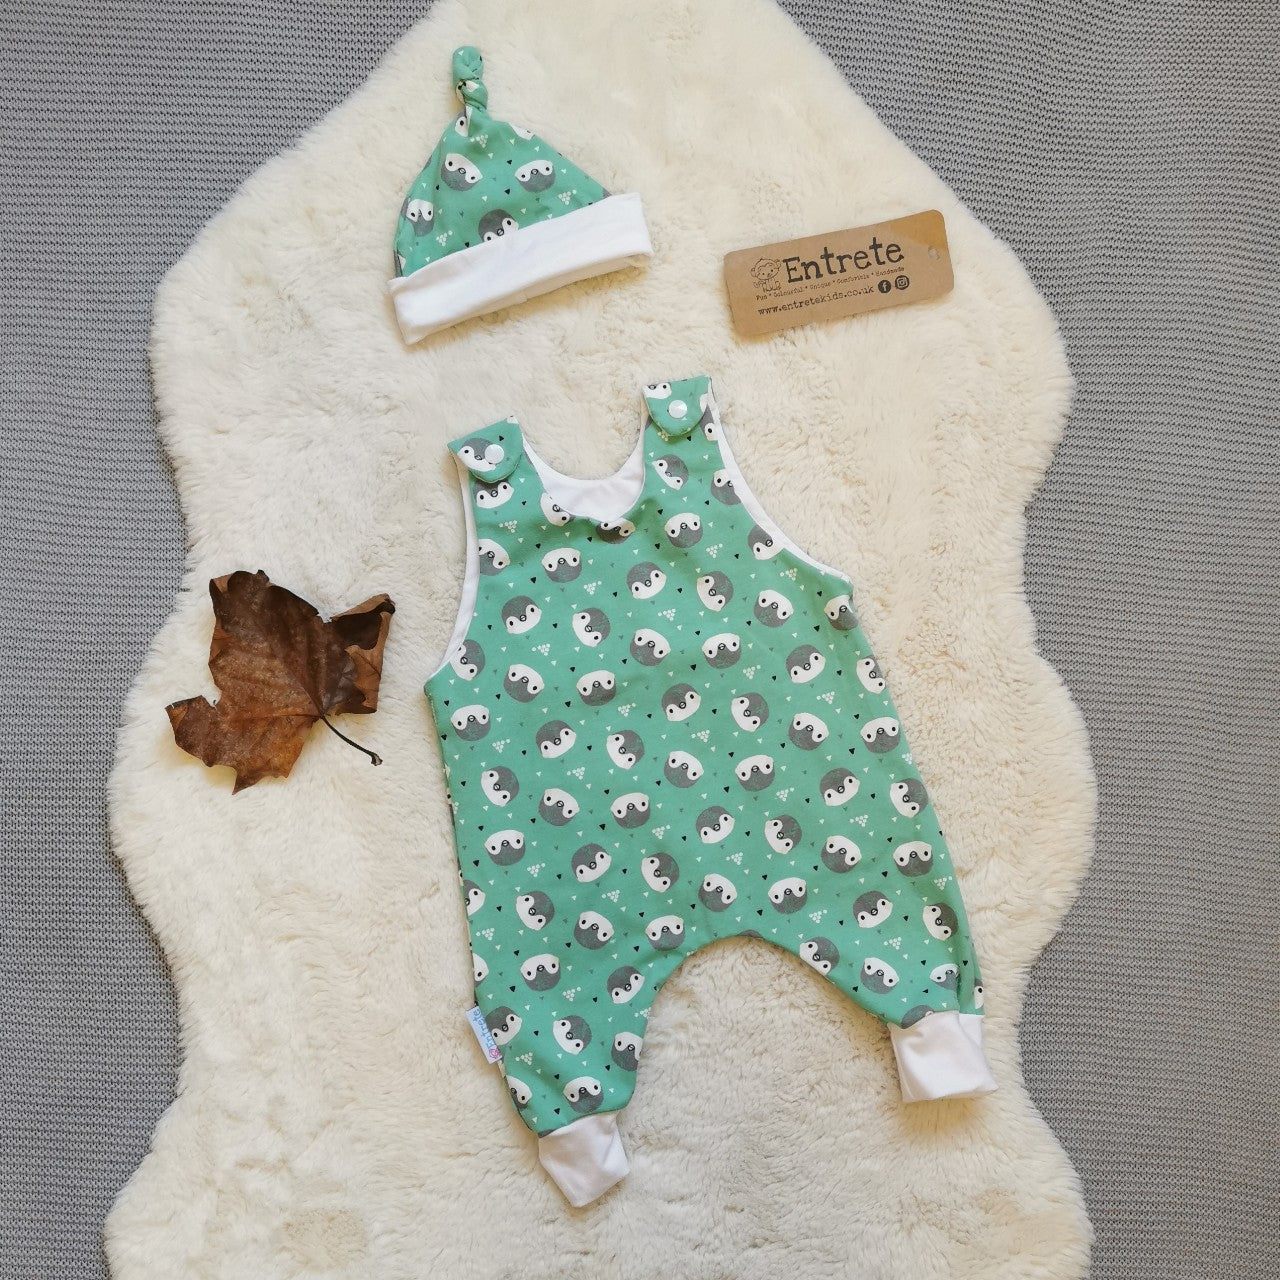 A romper gift set shown in mint penguins for demonstration purposes, your gift set will be handmade using navy crocodiles cotton jersey.